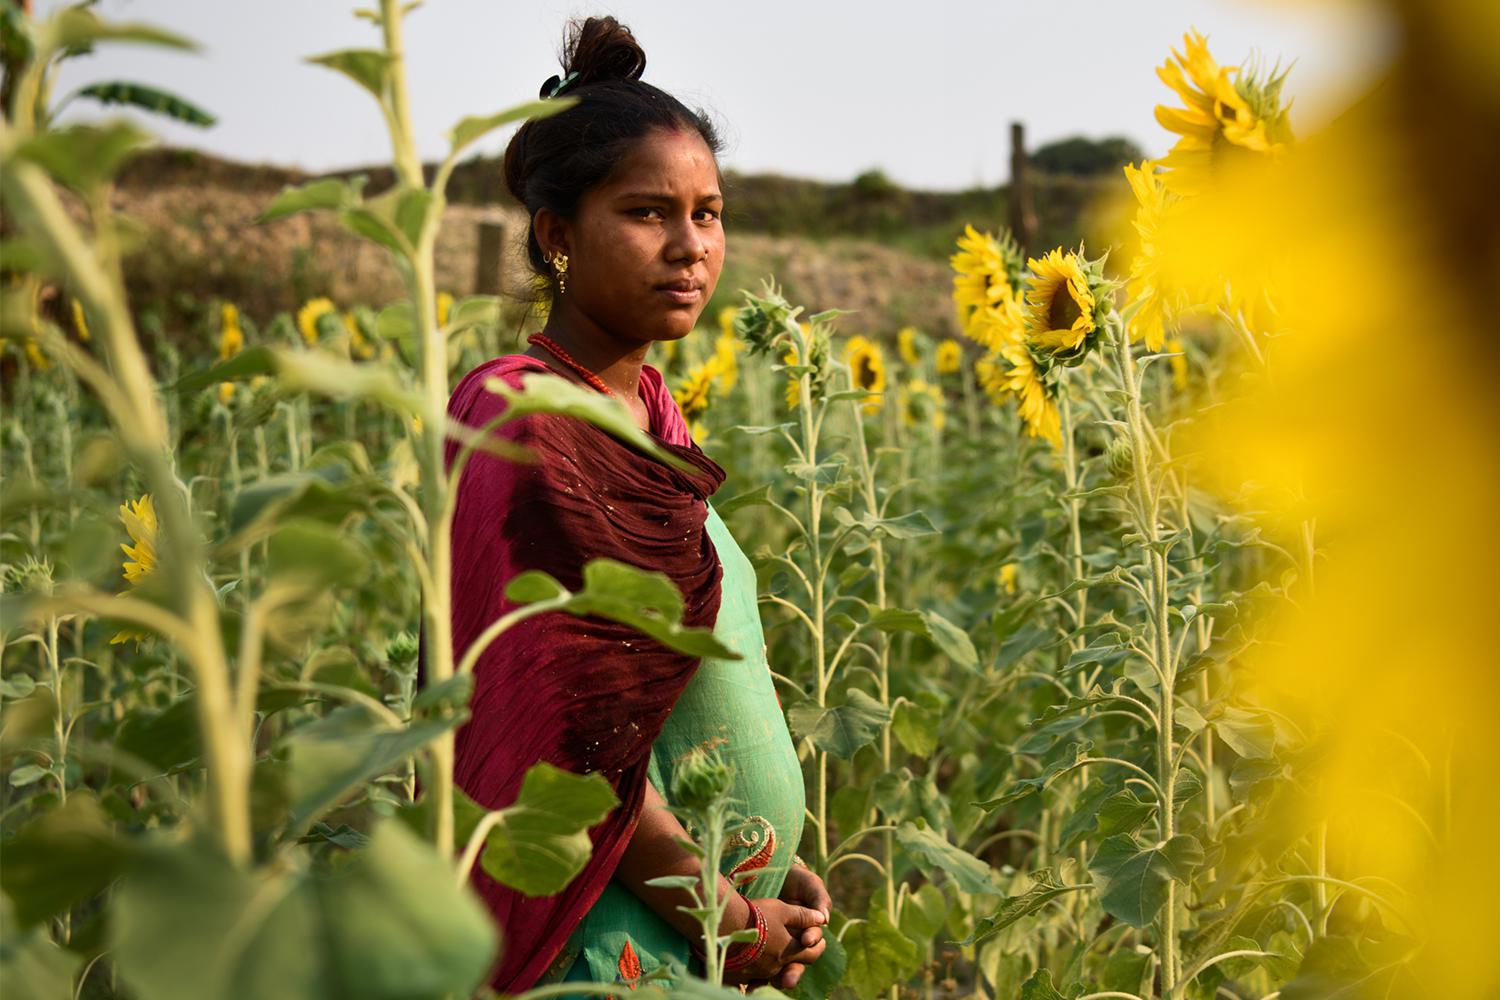 Child Marriage in Nepal | HRW